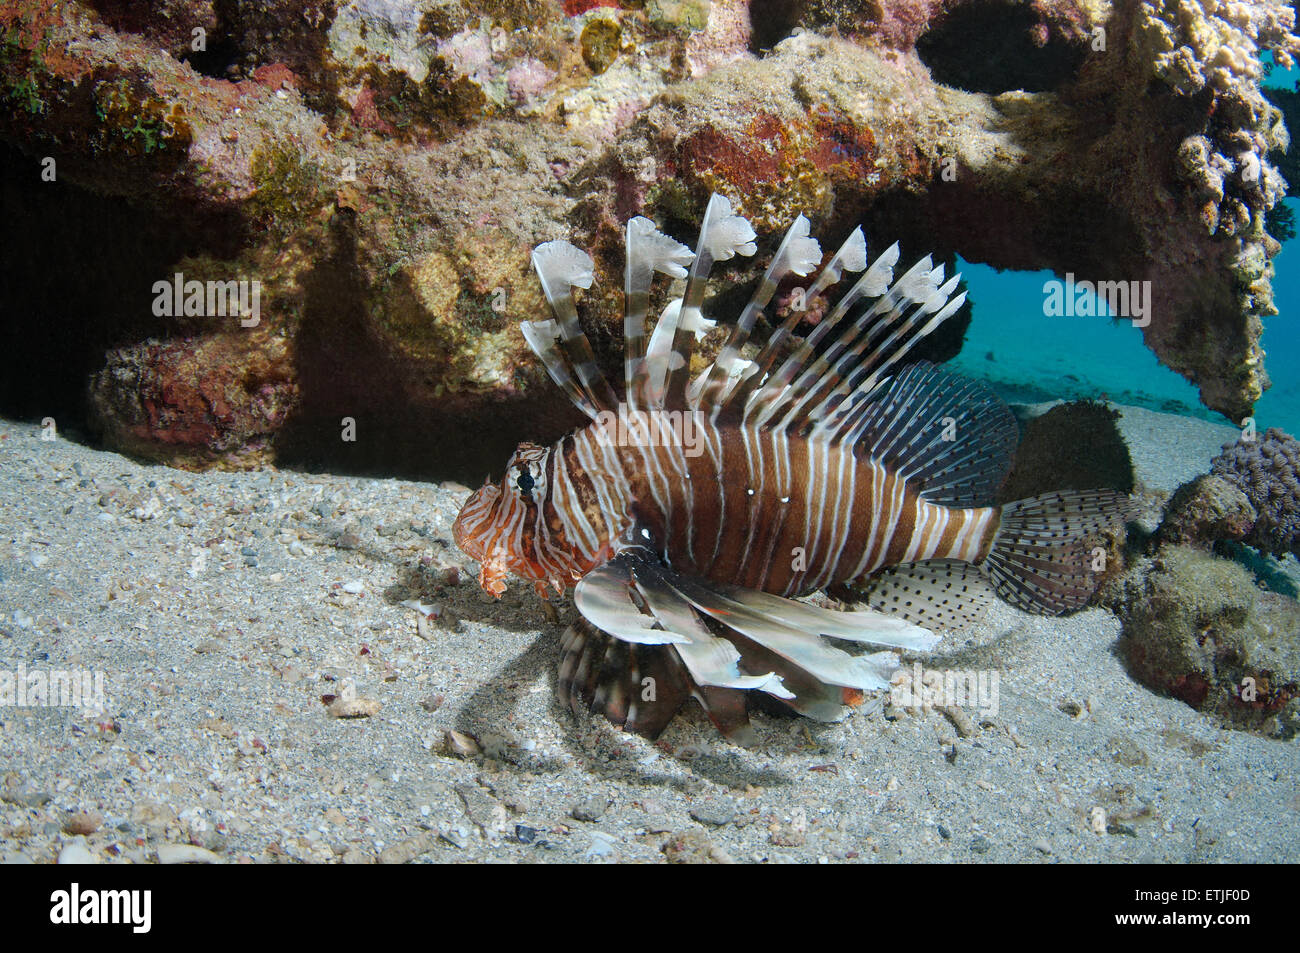 Poisson lion africain, Chabot ou Frillfin turkeyfish firefish Pterois (mombasae) Banque D'Images